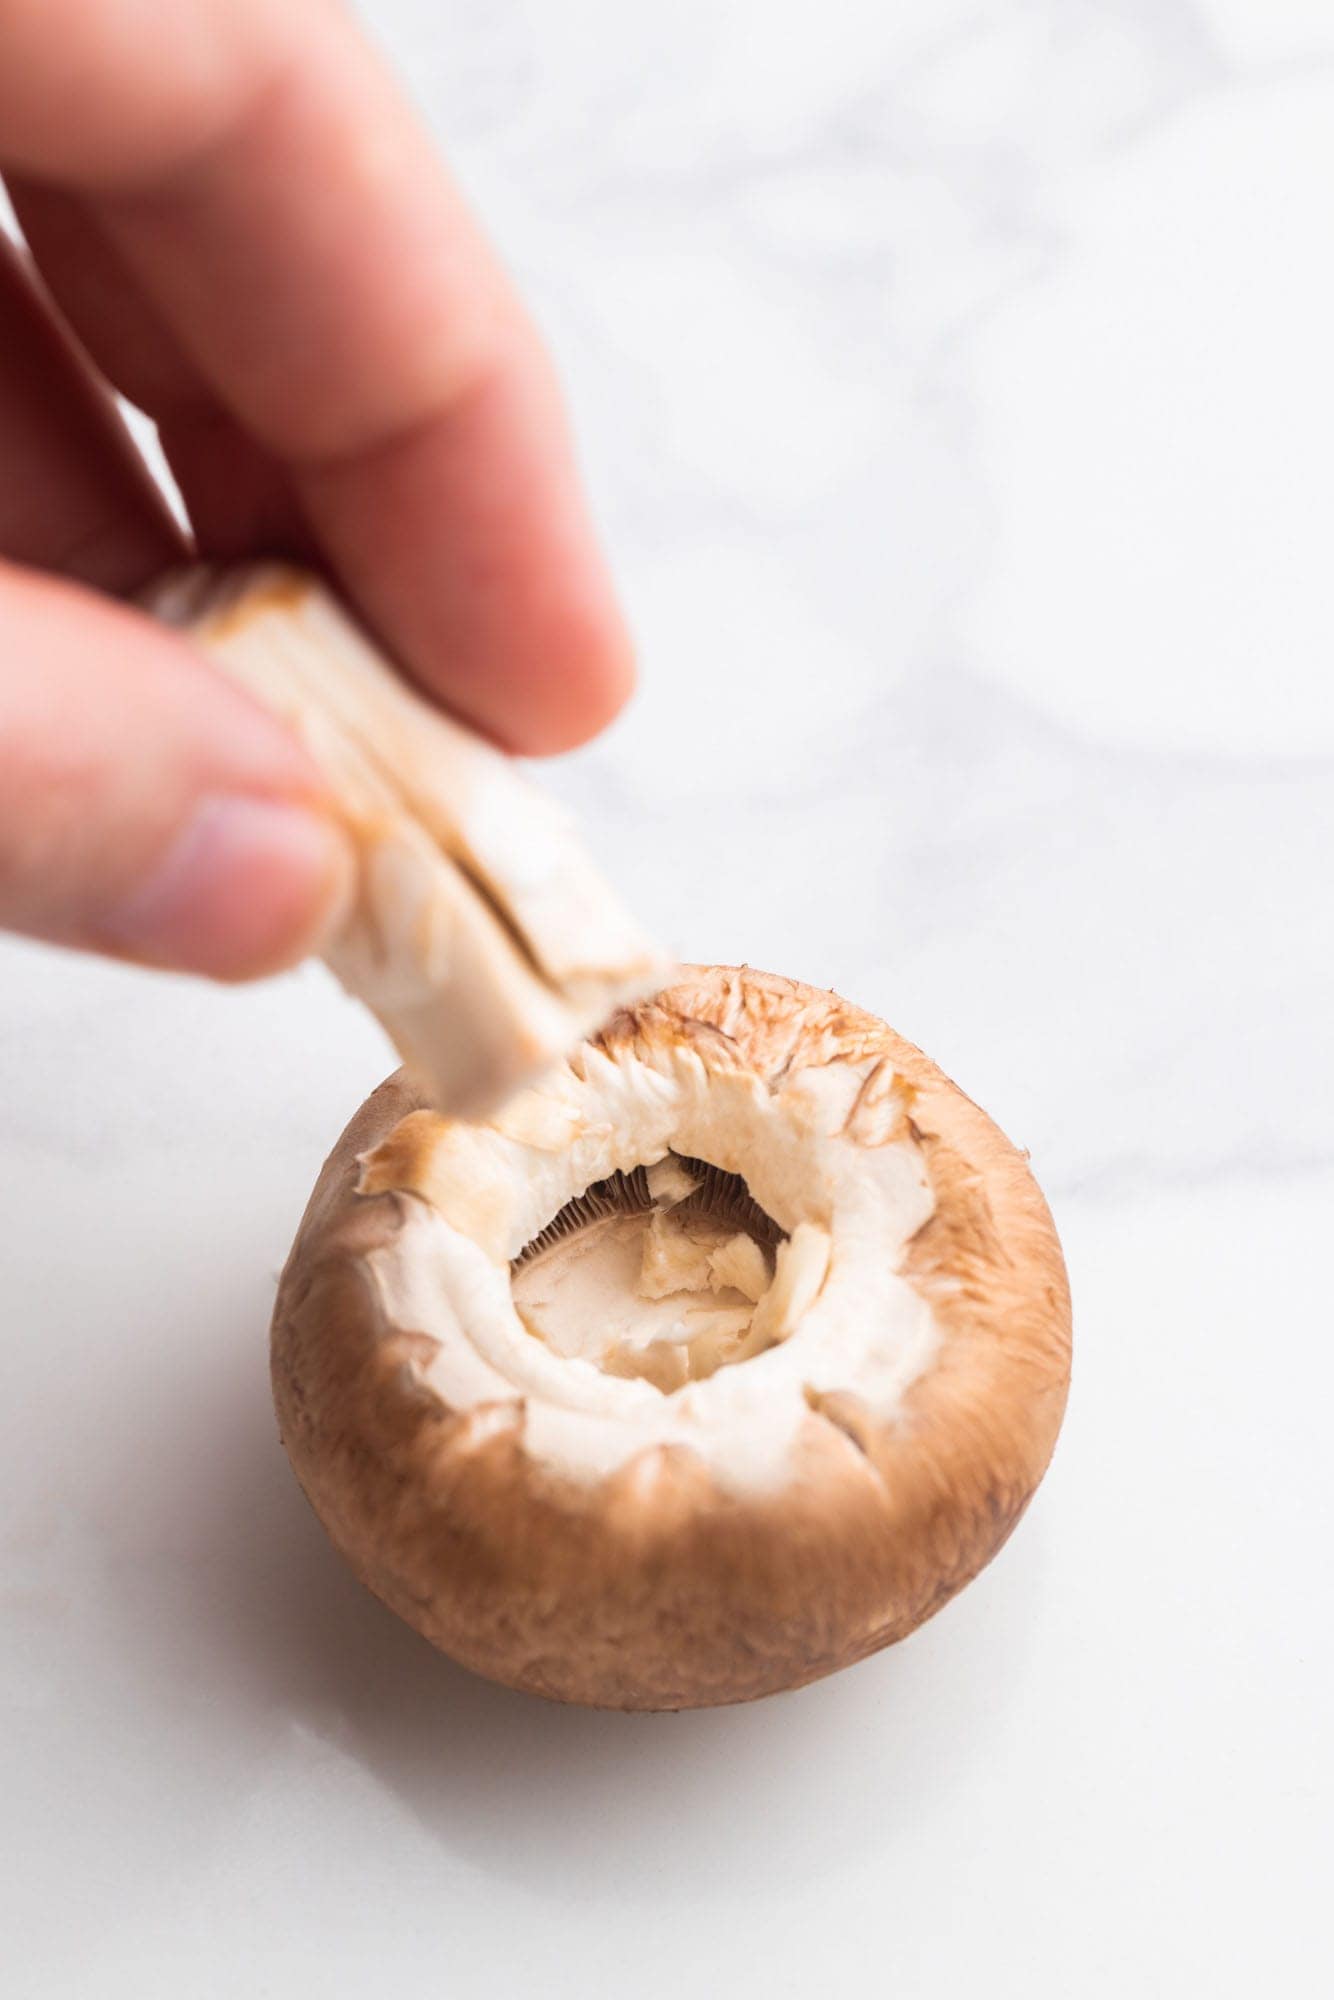 a hand pulling the stem from a cremini mushroom.